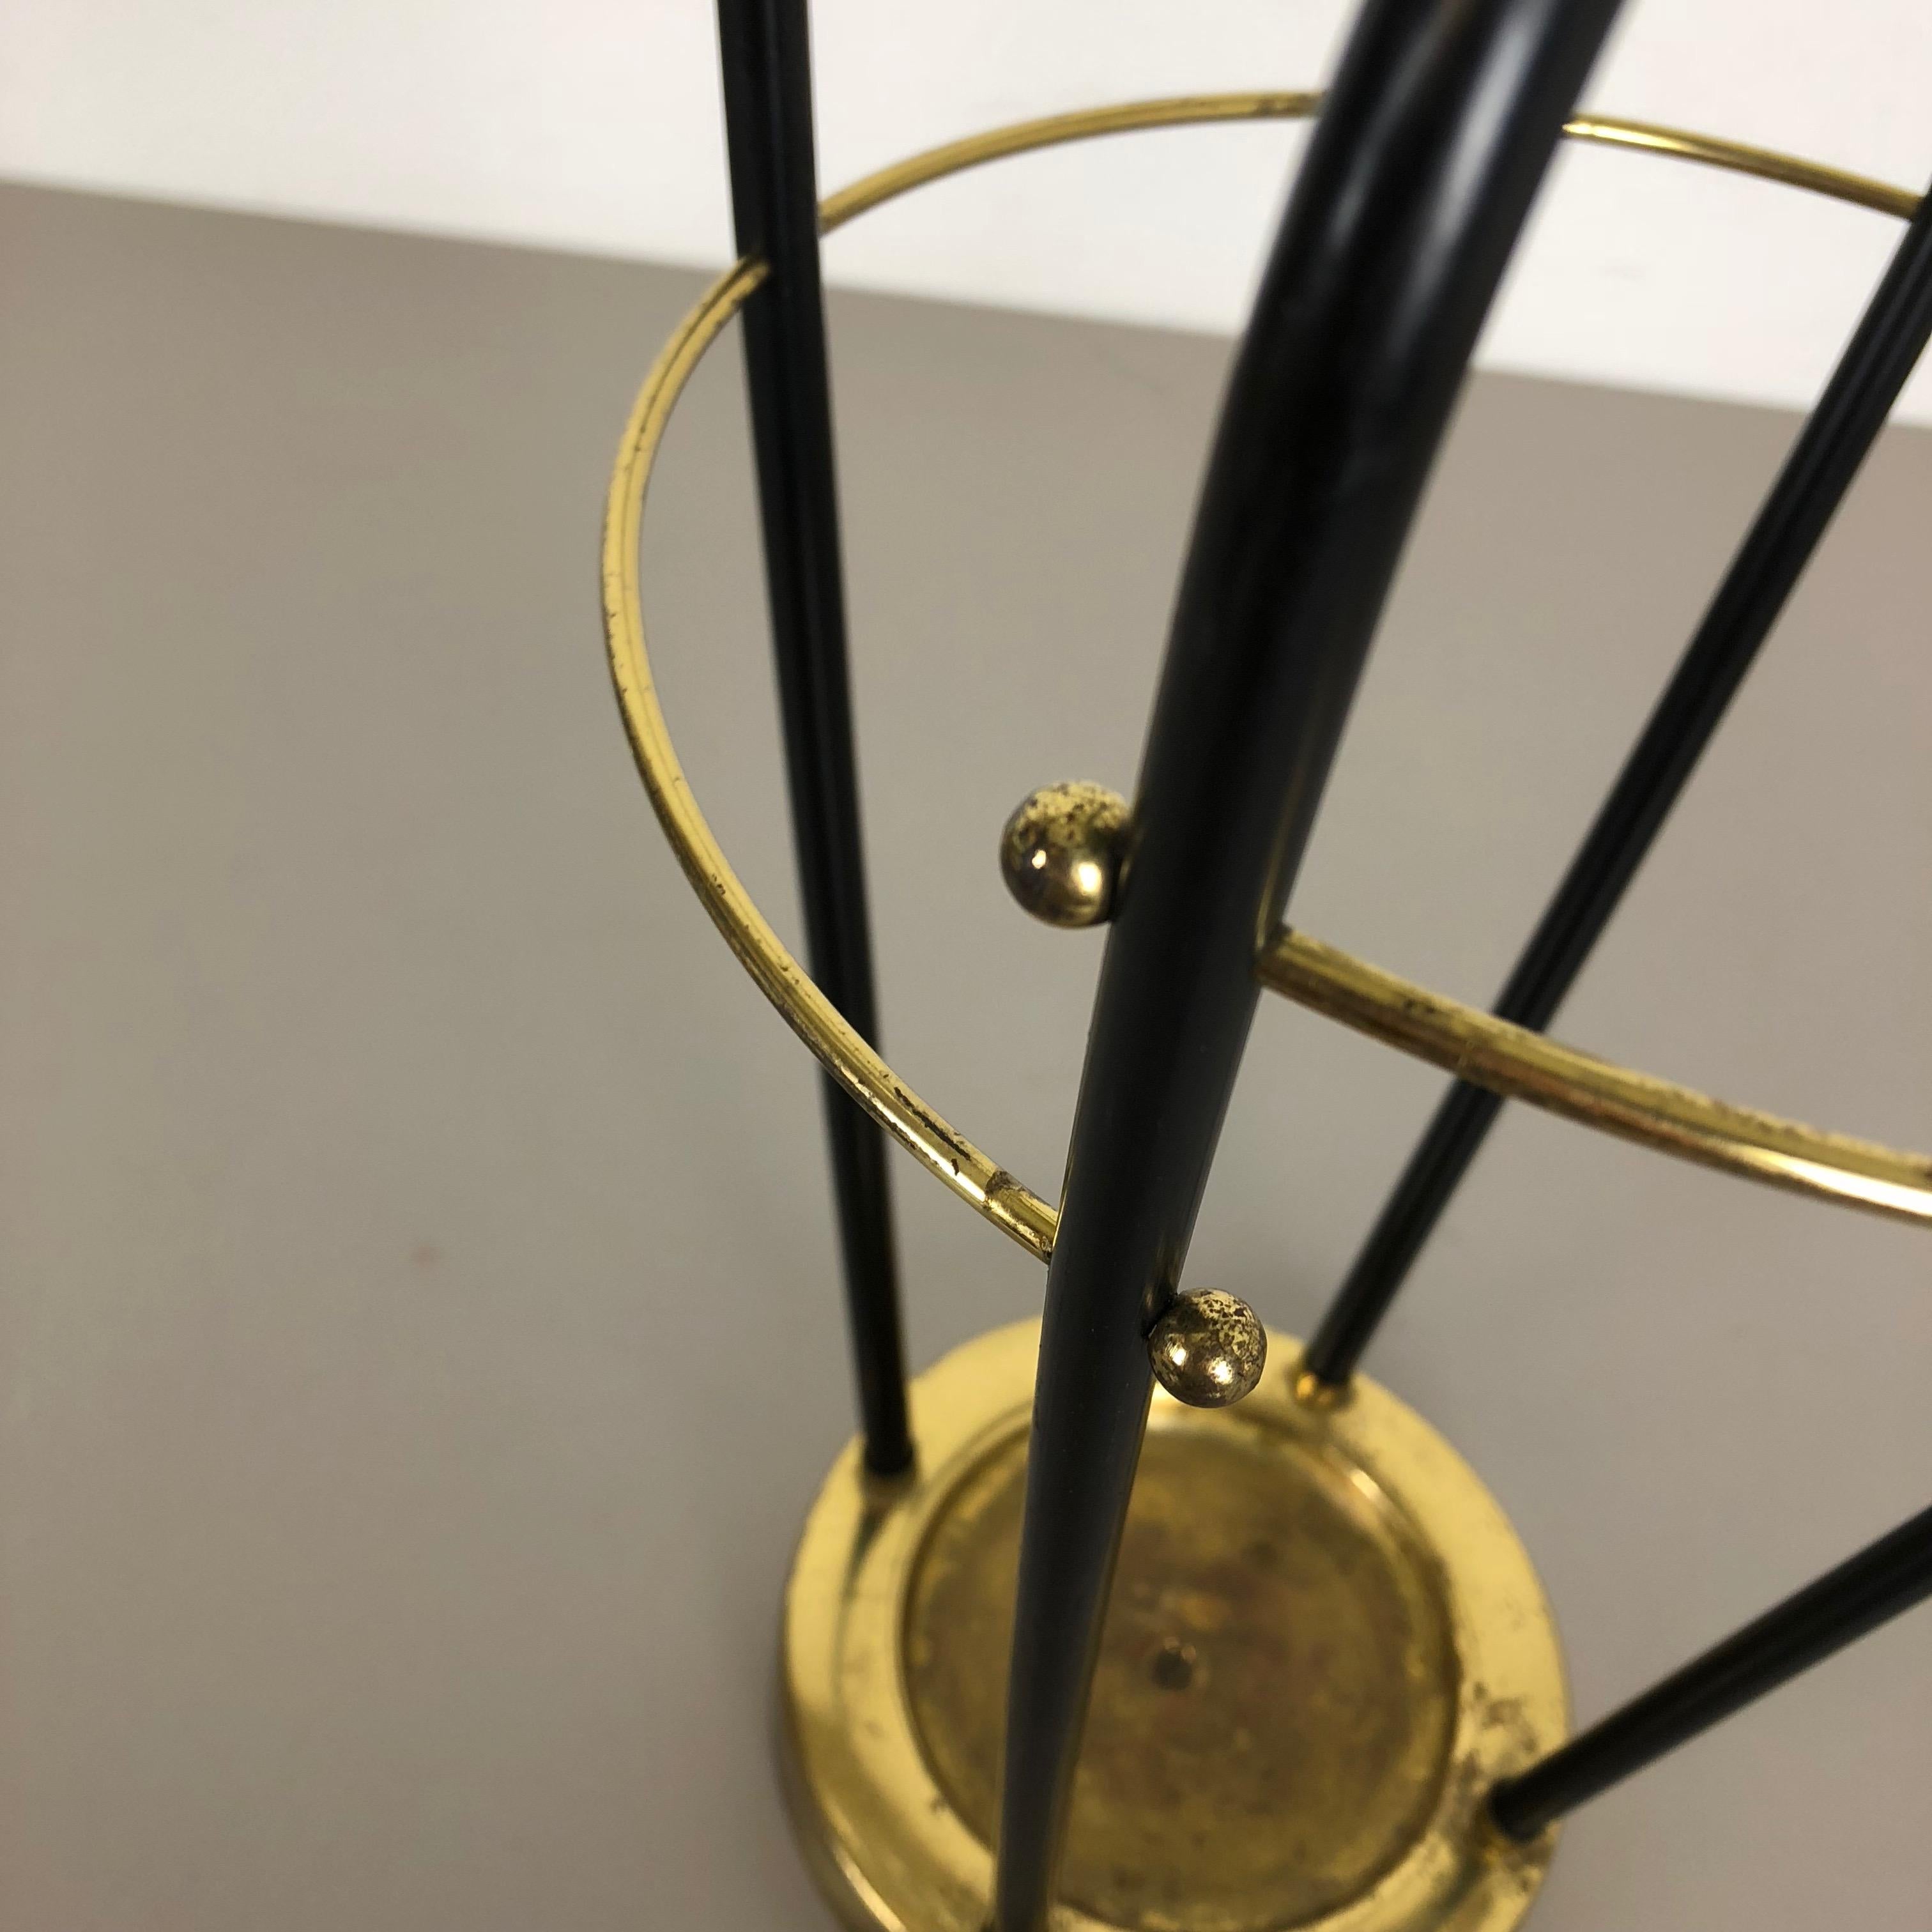 Midcentury Metal Brass Hollywood Regency Umbrella Stand, Germany, 1950s For Sale 4